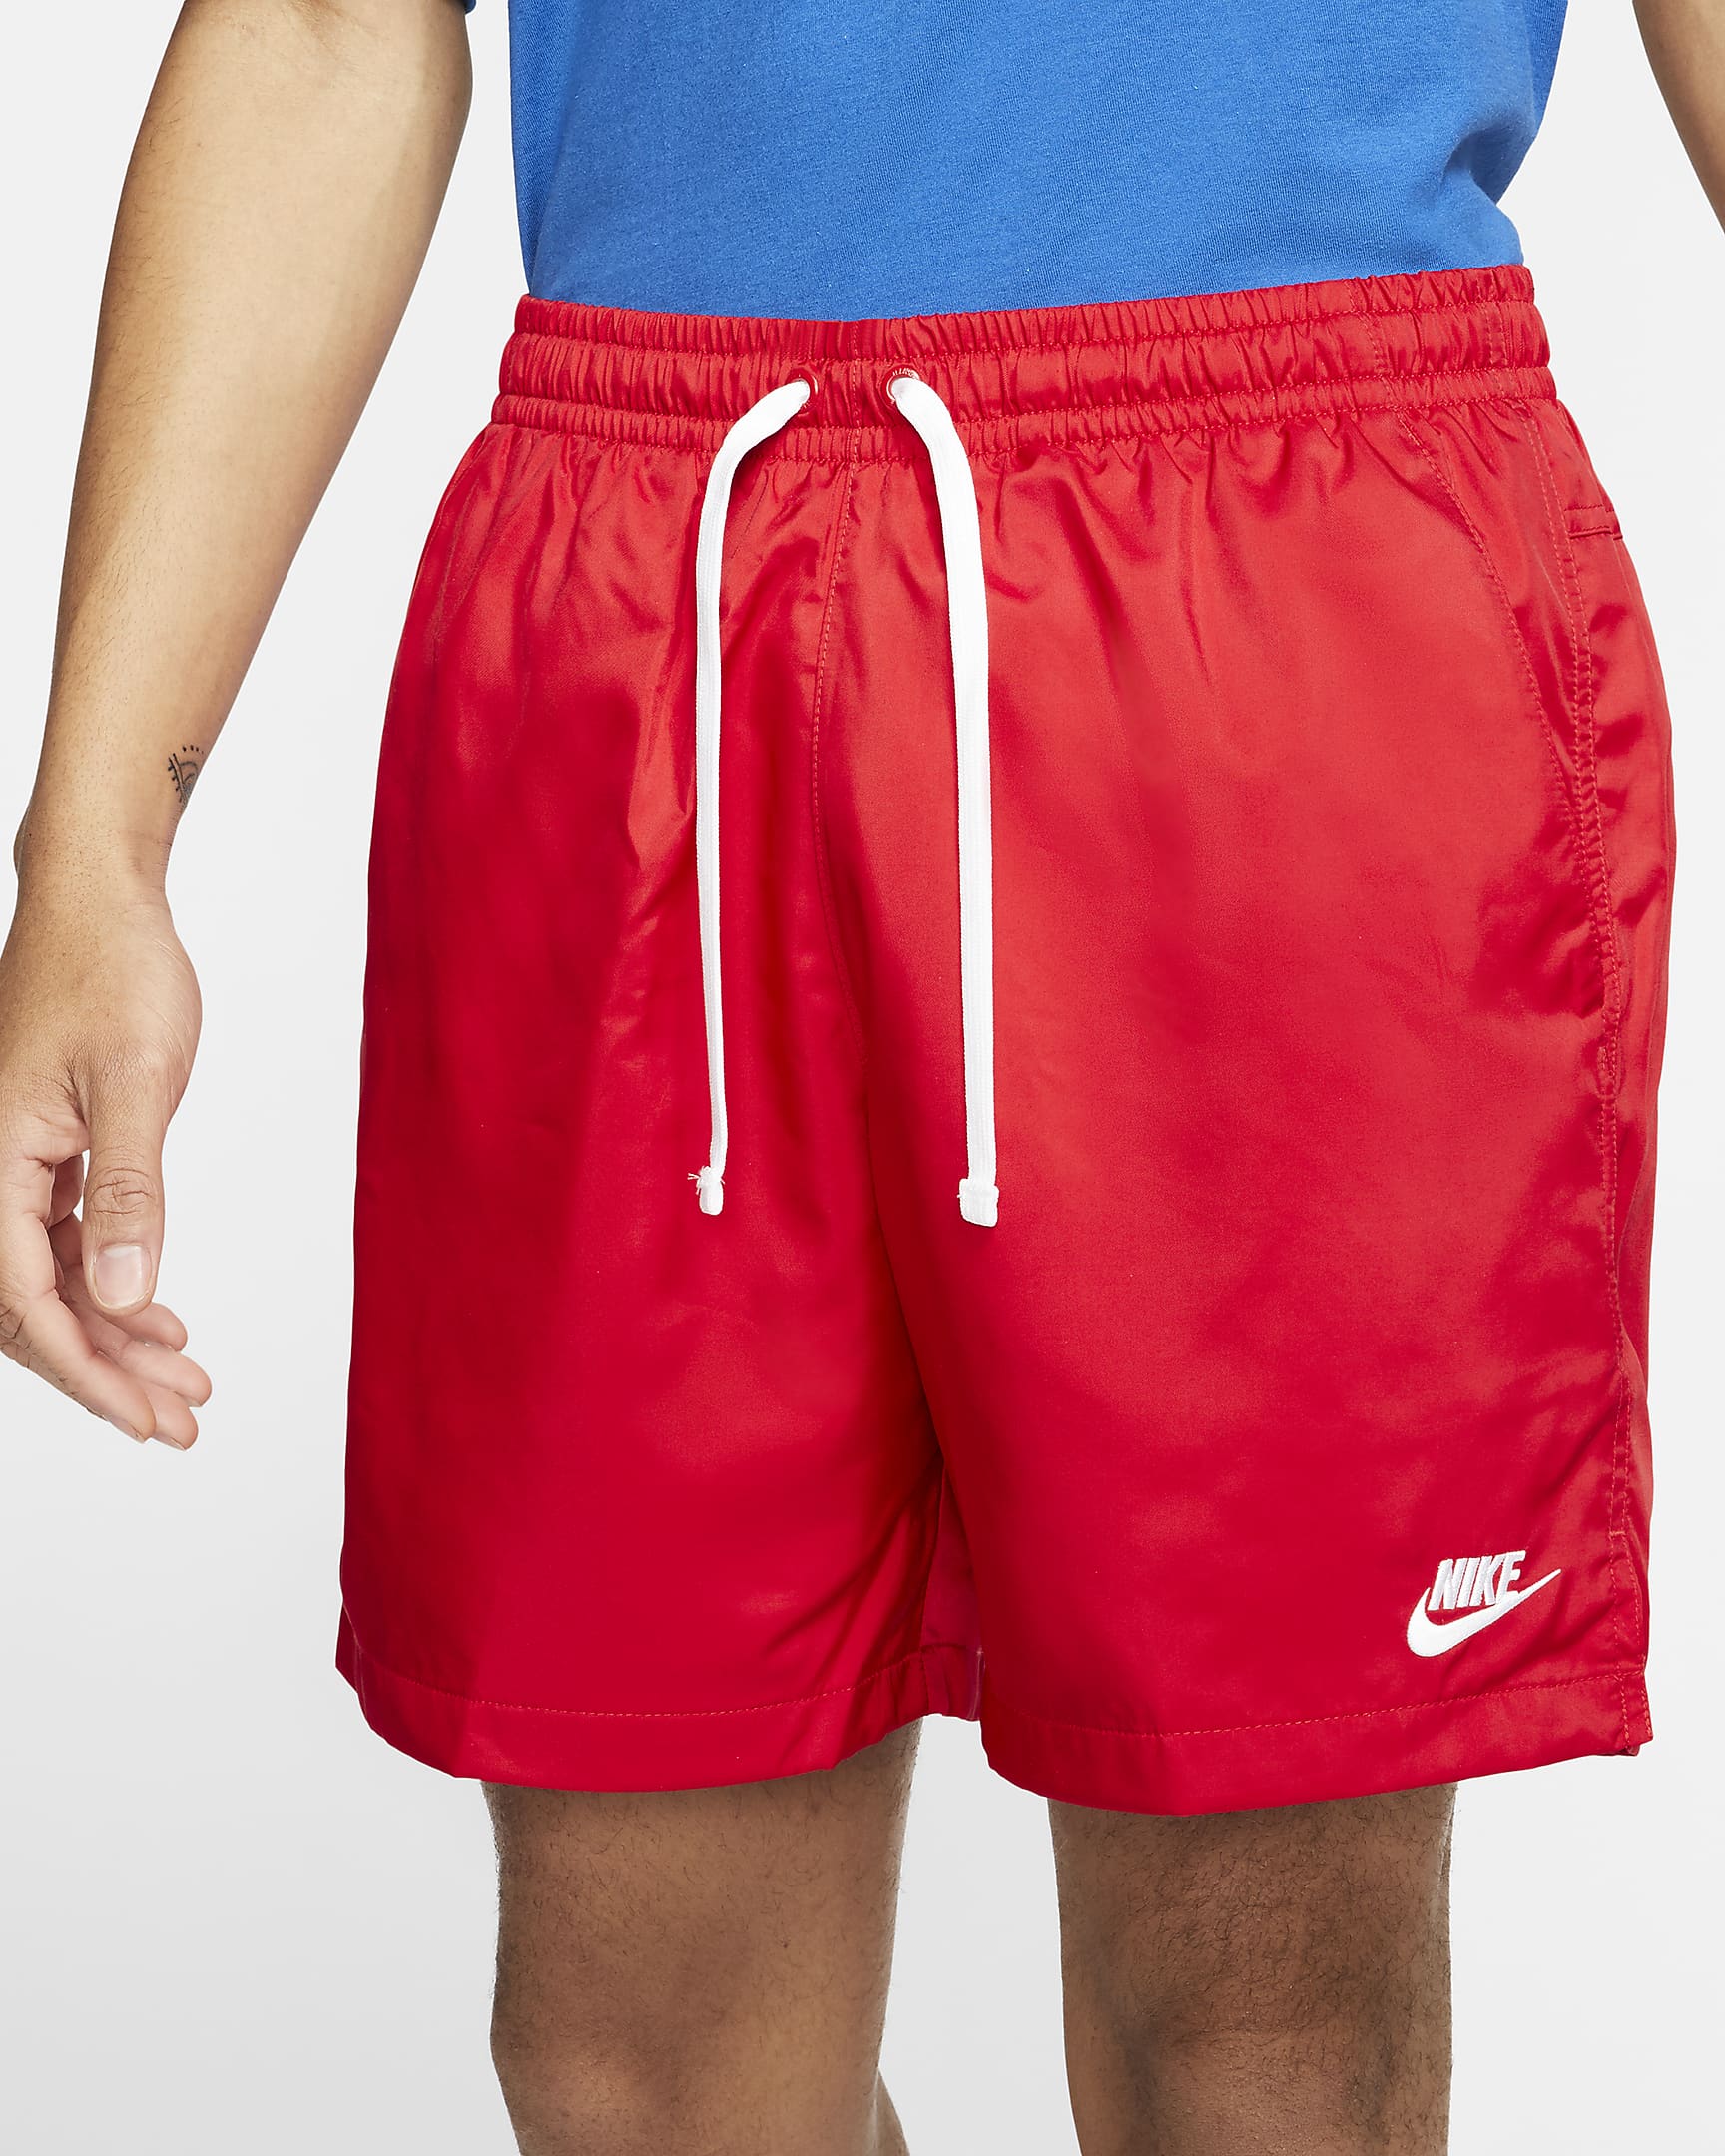 nike-sportswear-mens-woven-shorts-VFft3H.png